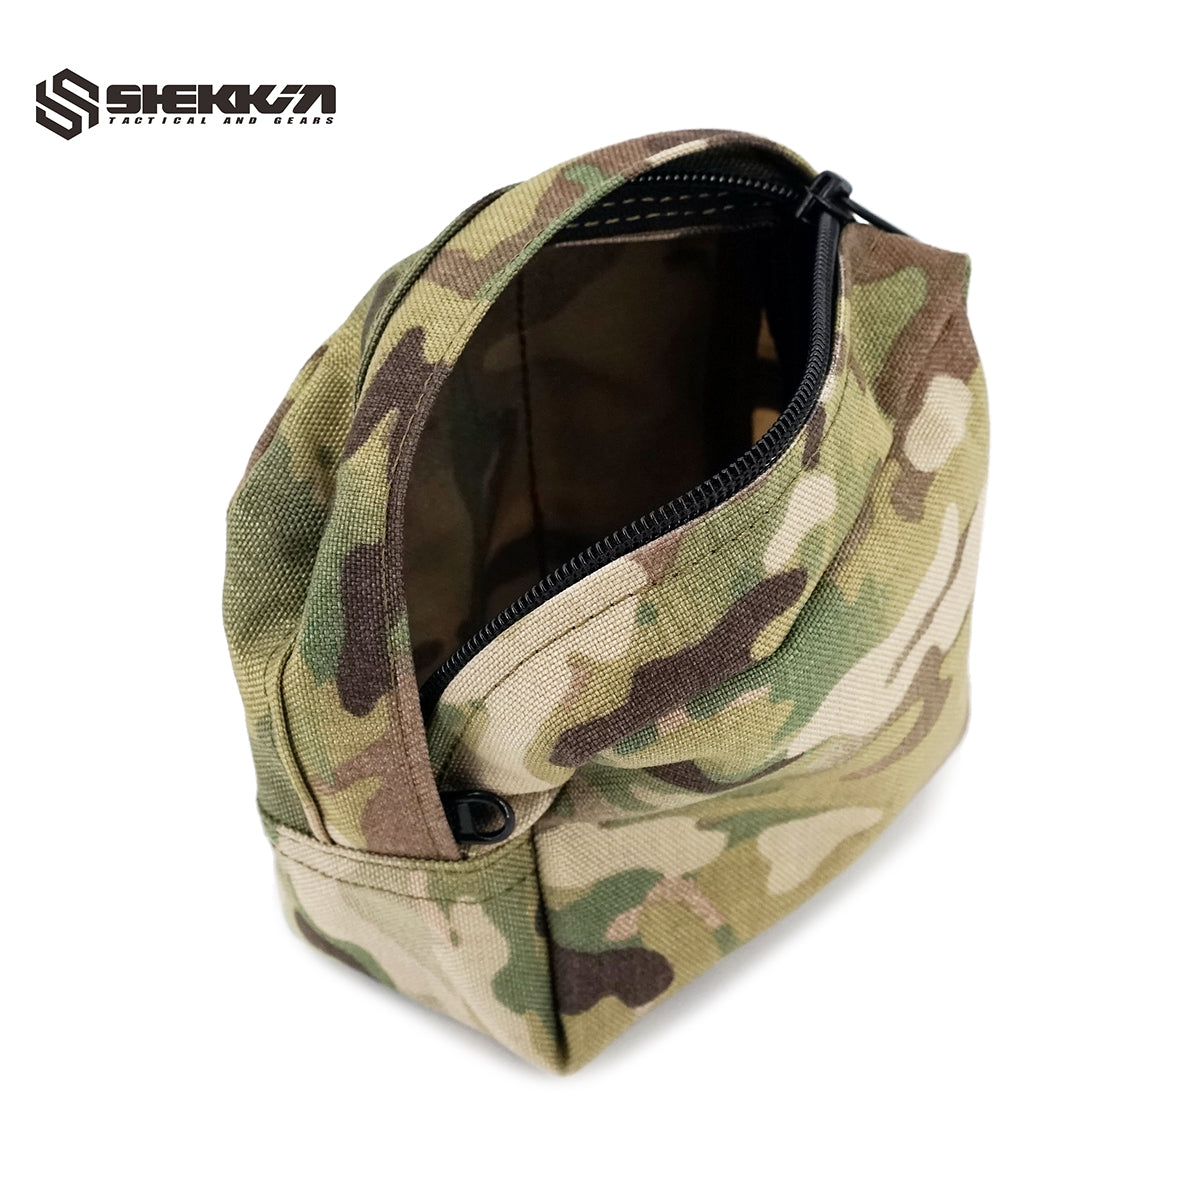 Pre MSA Paraclete style multicam small utility pouch - Shekkin Gears